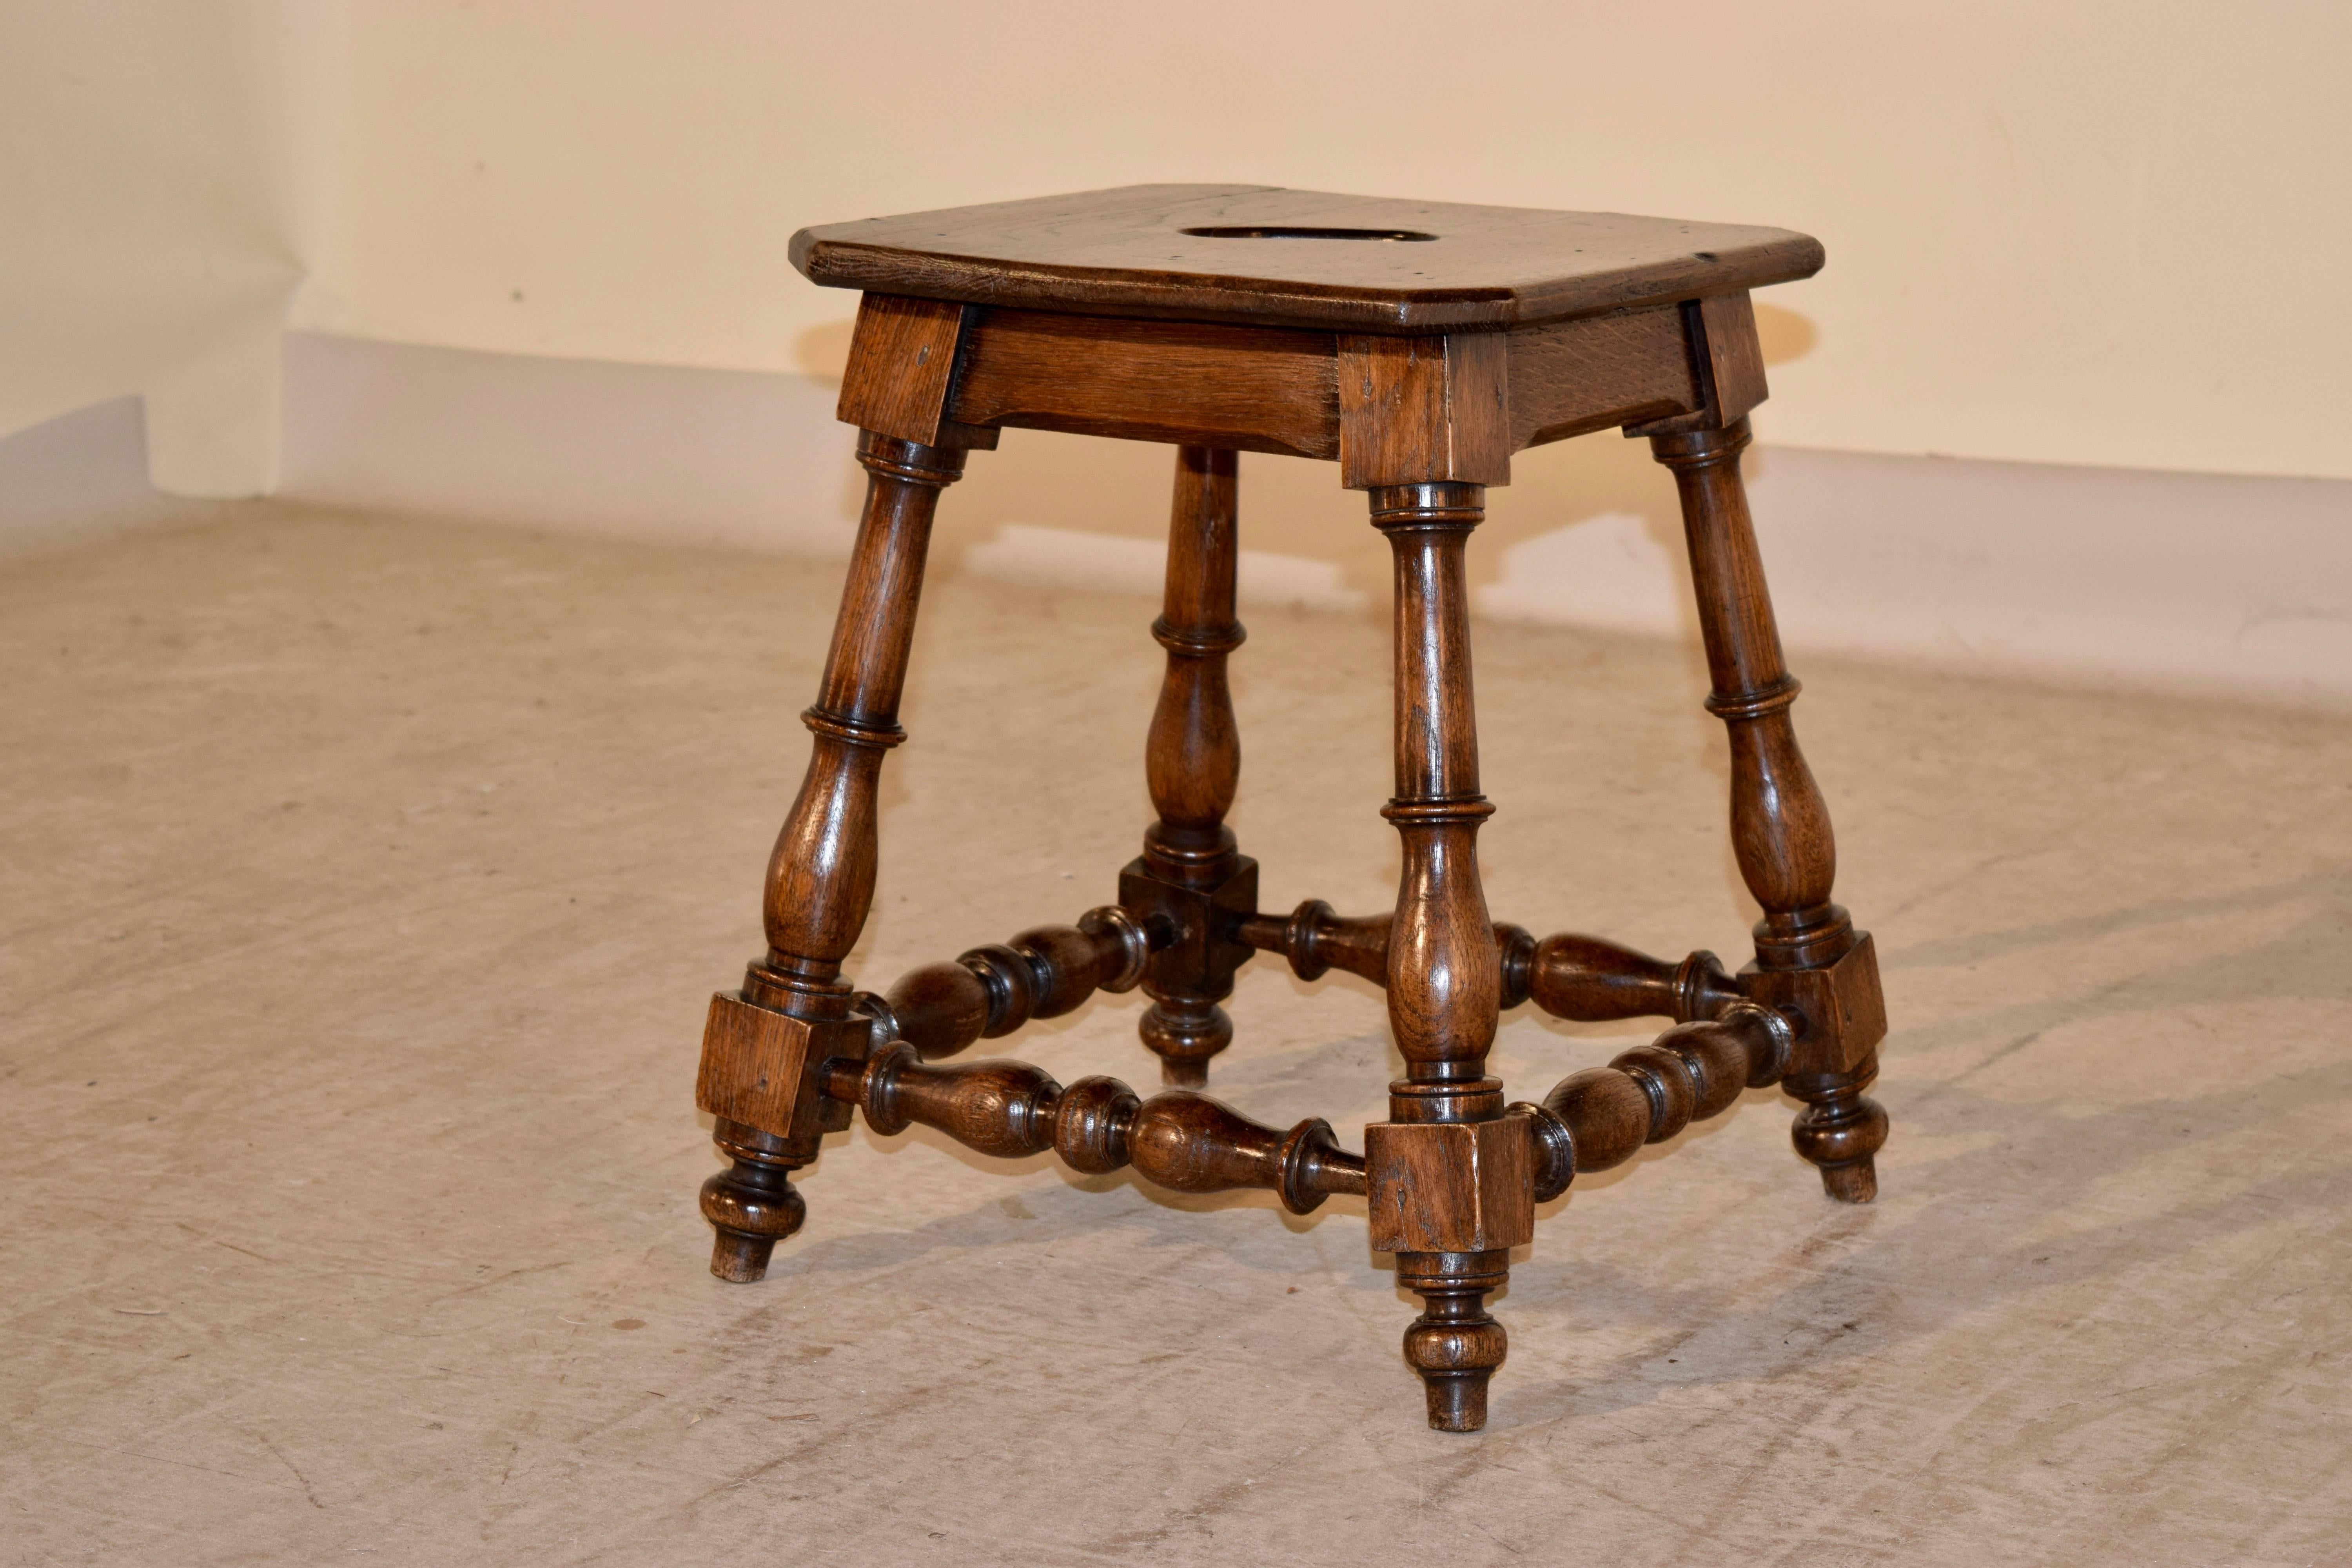 19th century oak stool from France with a two plank top, which has a handle cut-out. It has a simple apron and is supported on splayed turned legs, joined with turned stretchers.